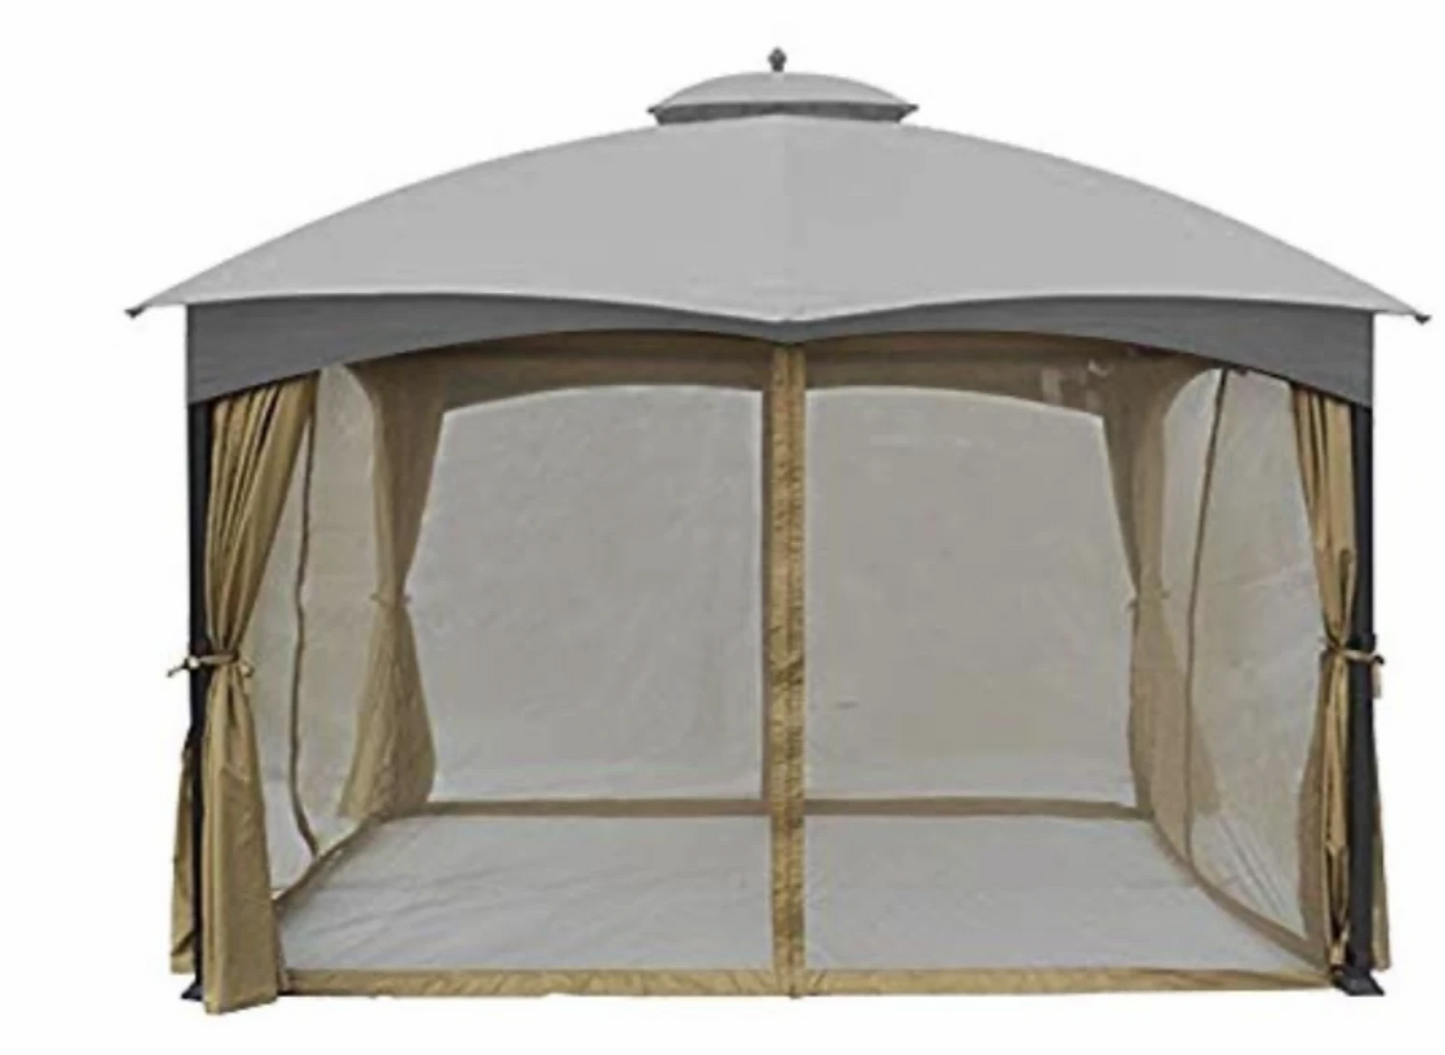 Lowes Allen and Roth 10 X 12 Gazebo Curtain and Screen Bundle Package for 0510327